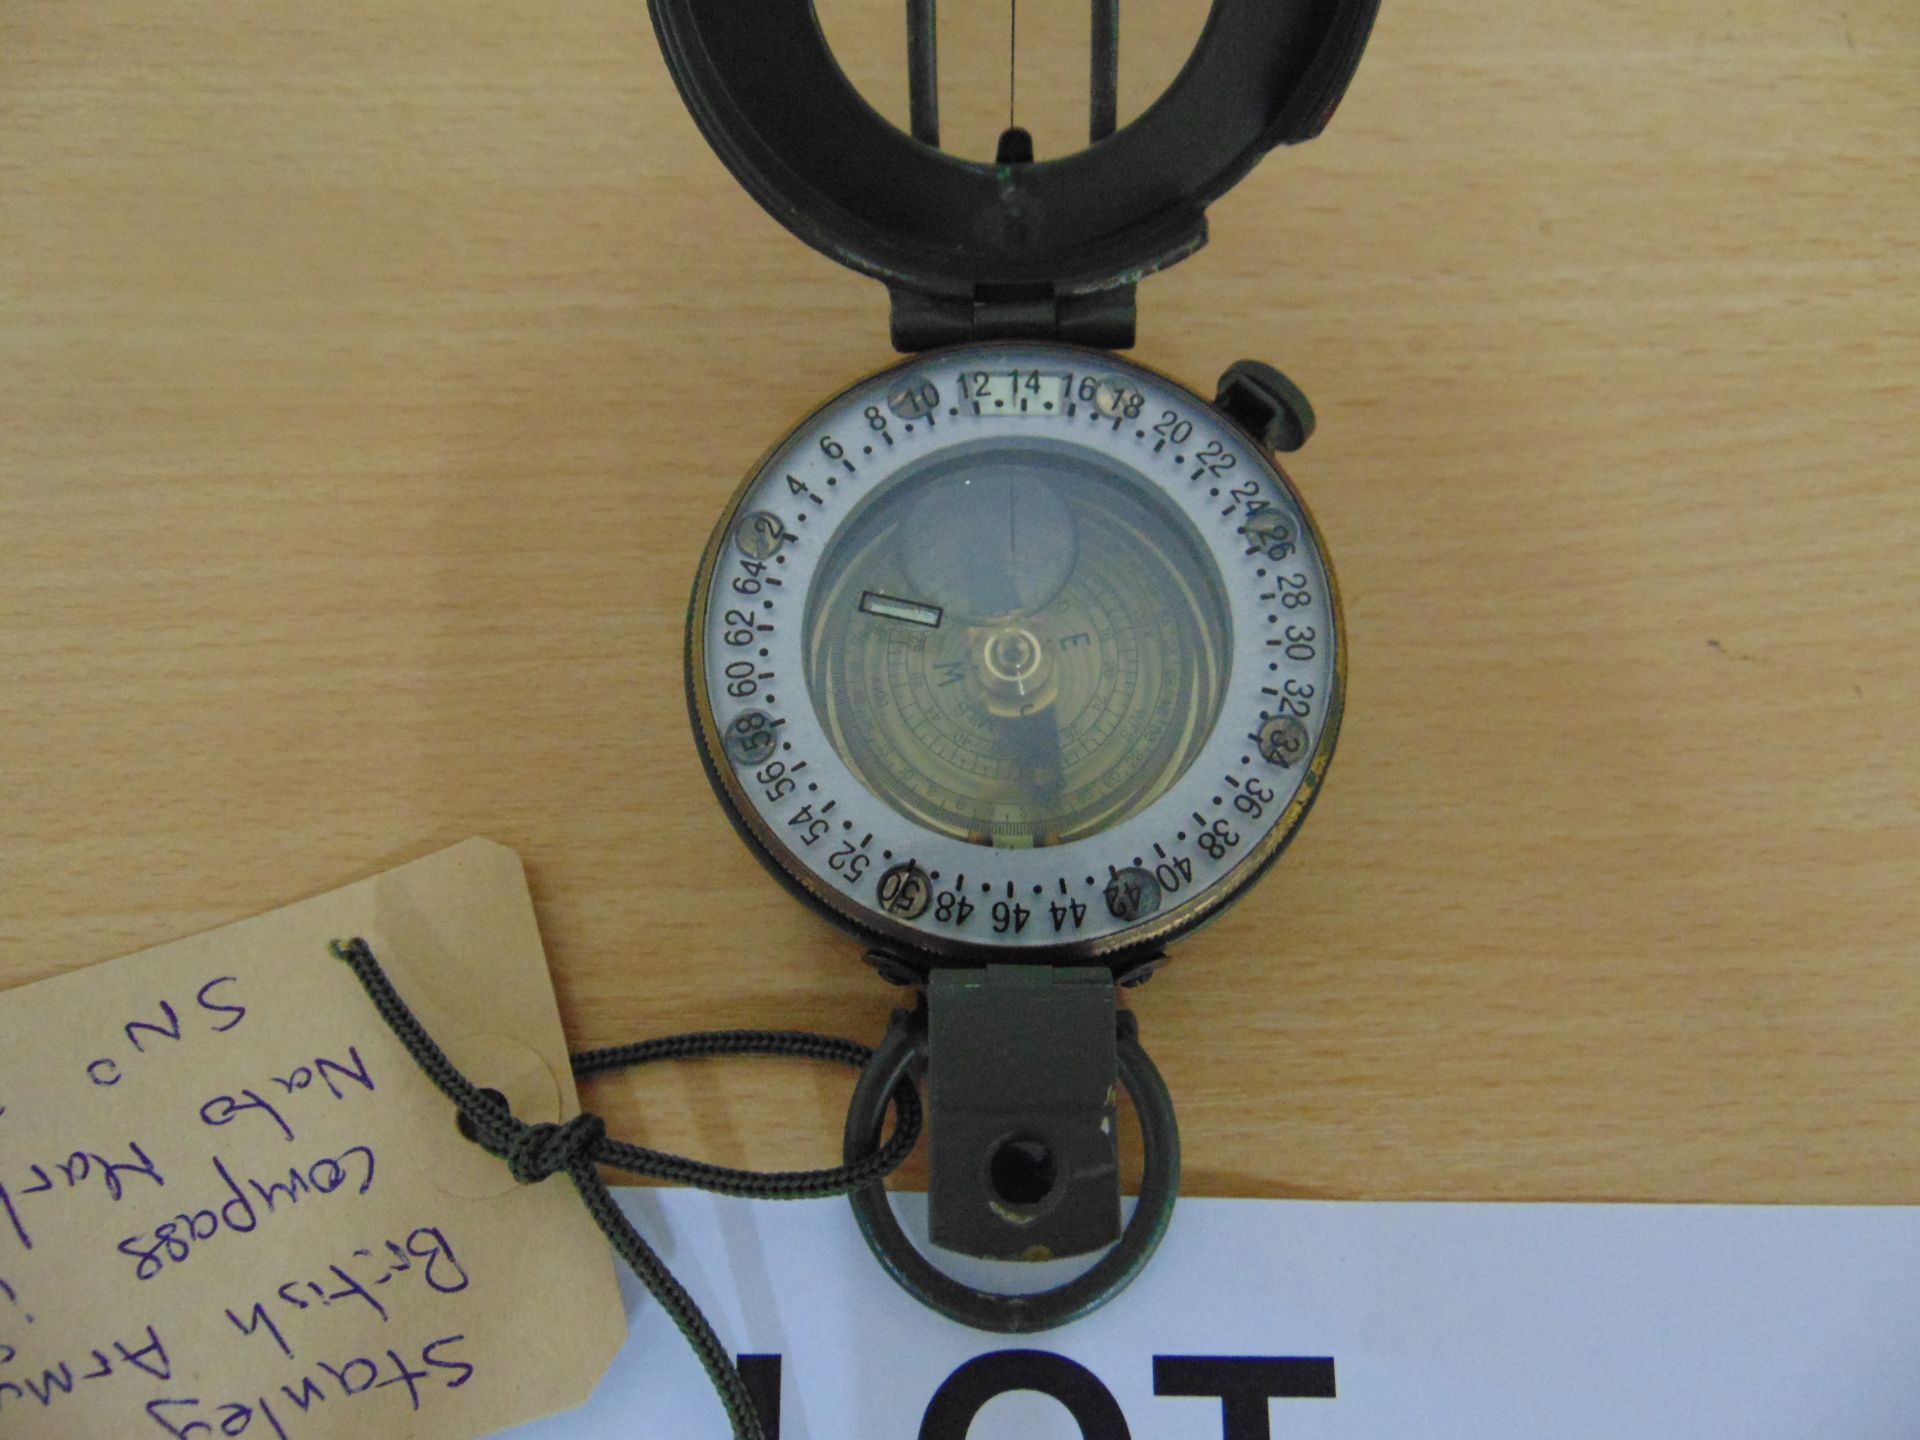 Stanley London British Army Prismatic Compass in Mils, Nato Marks, SNo 34807 - Image 3 of 3